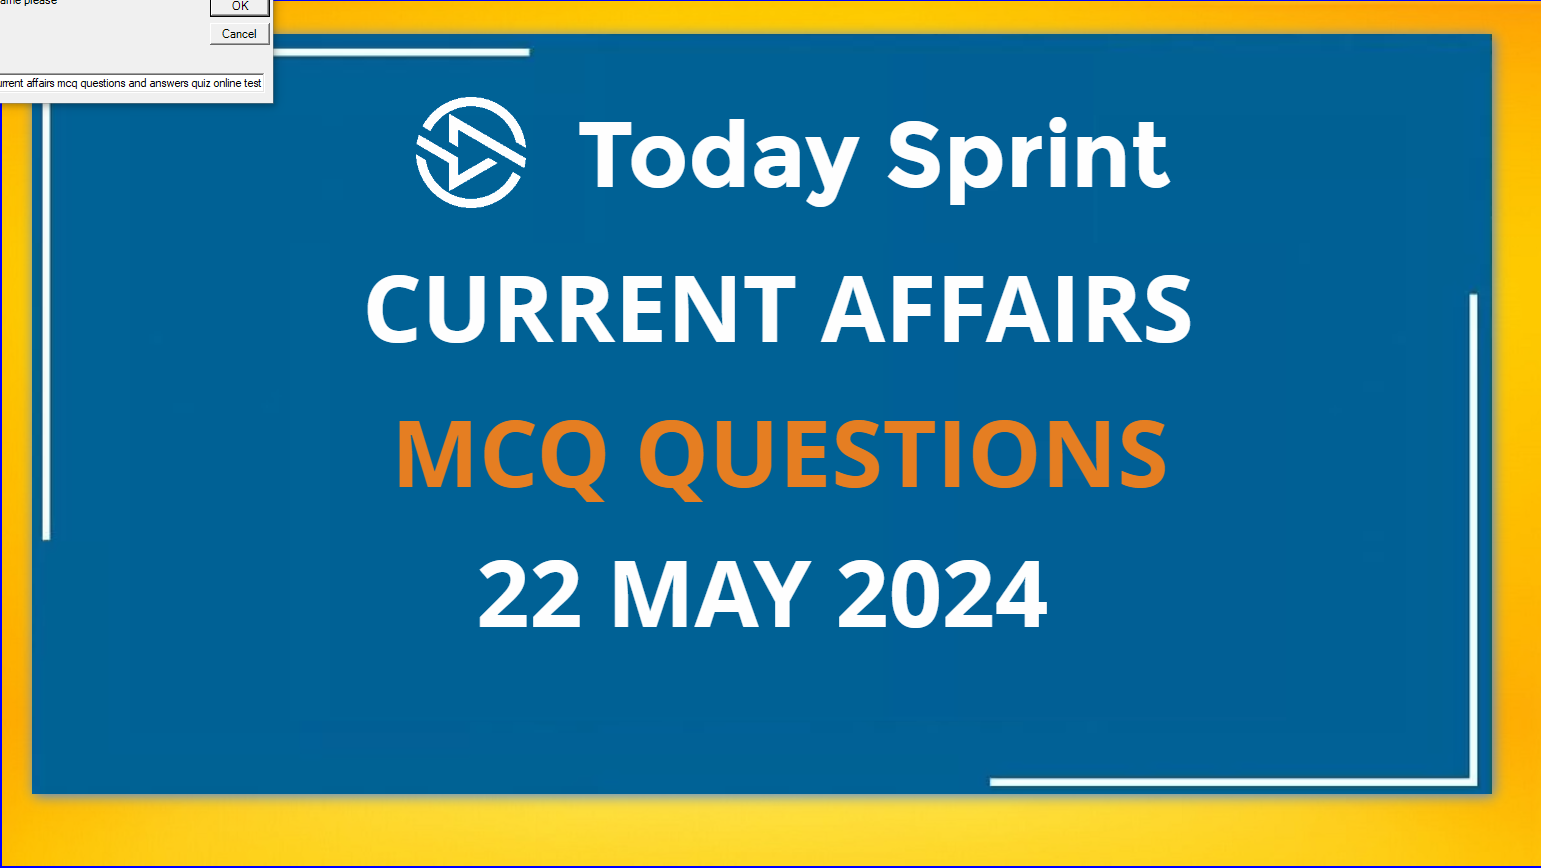 22 May 2024 Current Affairs mcq Hindi and English Online Test Questions and Answers